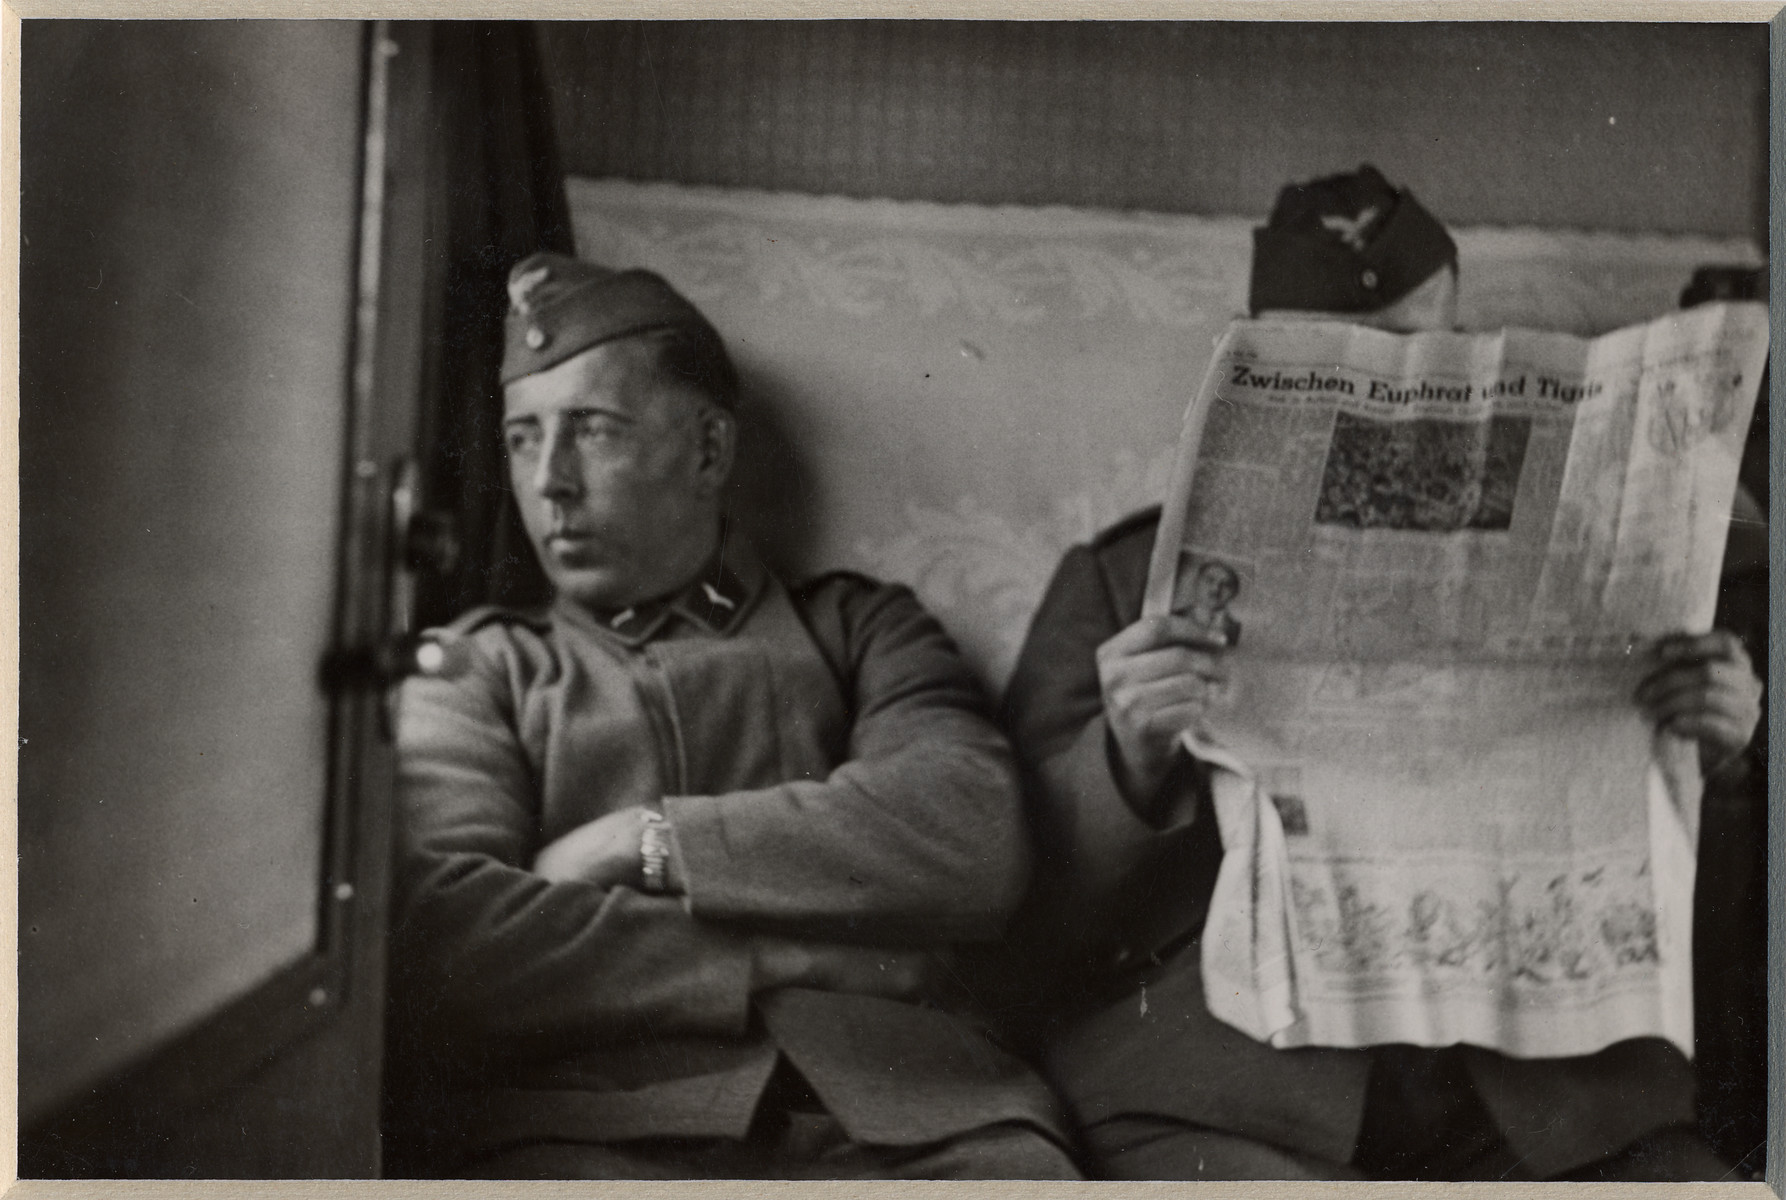 Two German men sit in a train car; one is reading a newspaper.

The back page is a story entitled "Between the Tigres and the Euphrates".